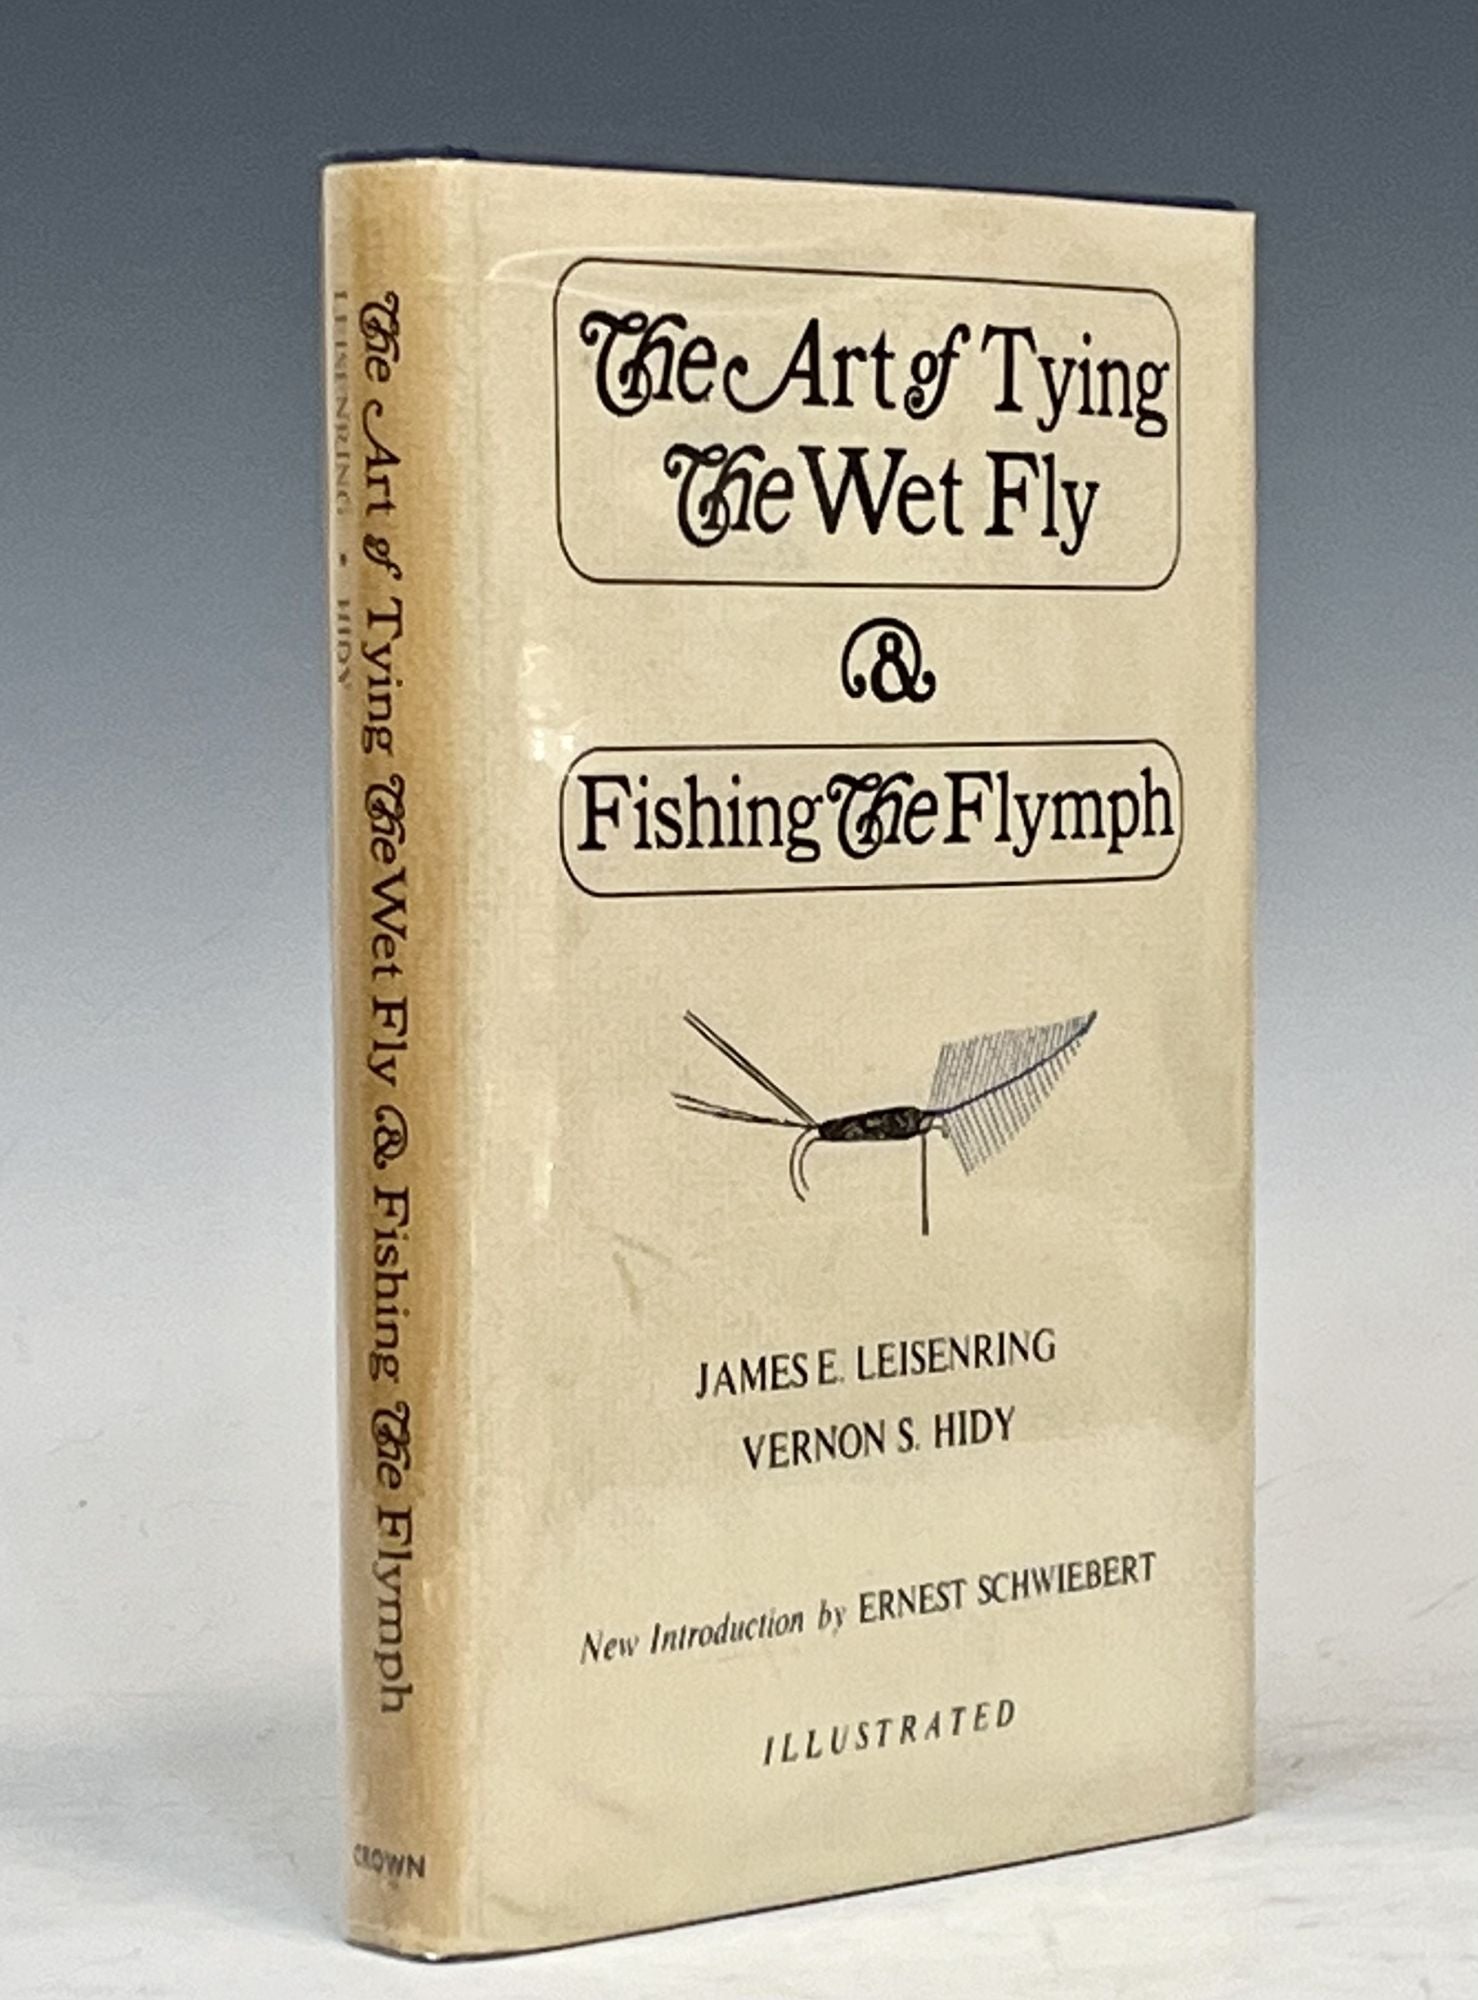 The Art of Tying the Wet Fly & Fishing the Flymph, James Leisenring,  Vernon Hidy